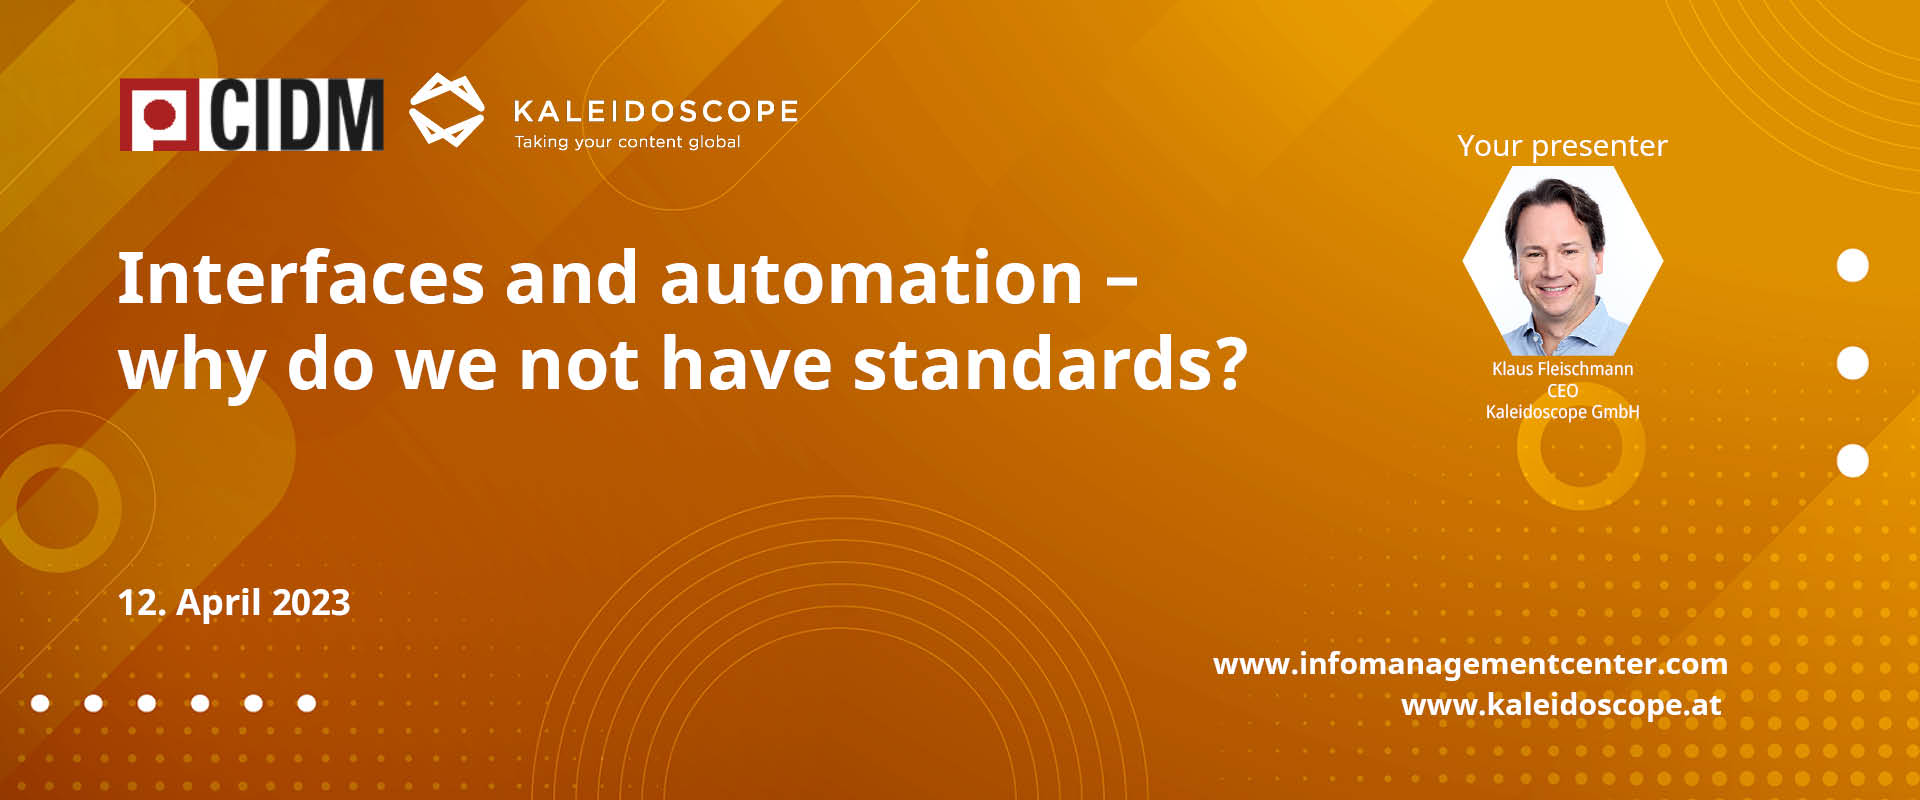 http://nterfaces%20and%20automation%20–%20why%20do%20we%20not%20have%20standards?%20Our%20webinar%20explains